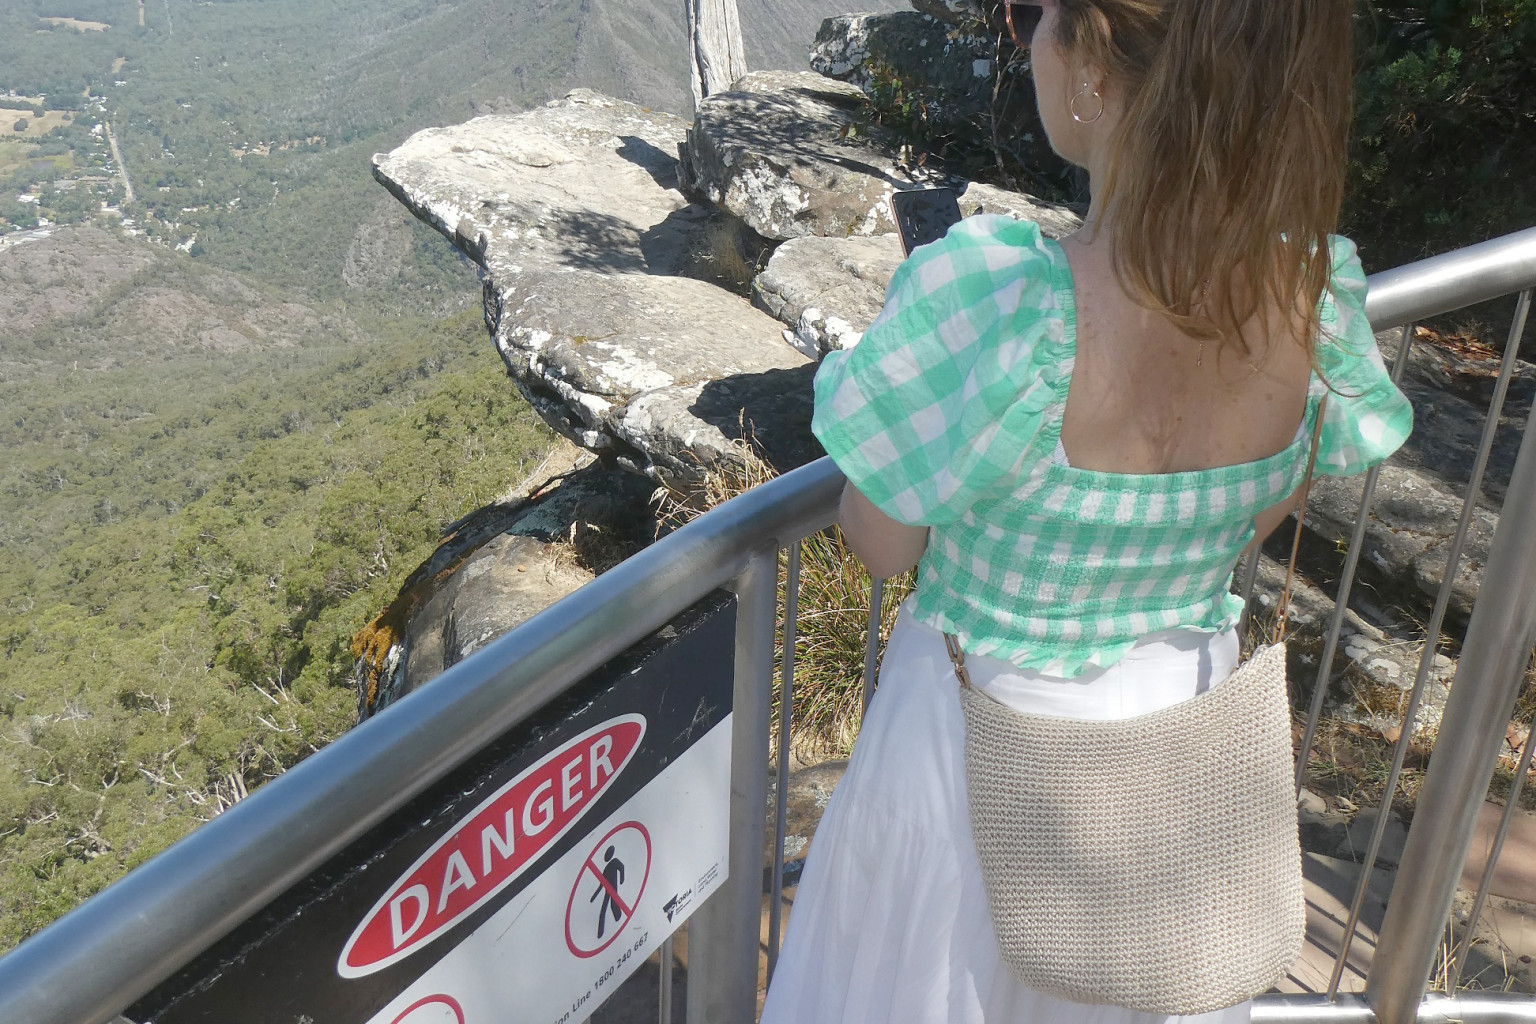 3 Warning signs are clearly evident on a safety barrier at the popular scenic spot.